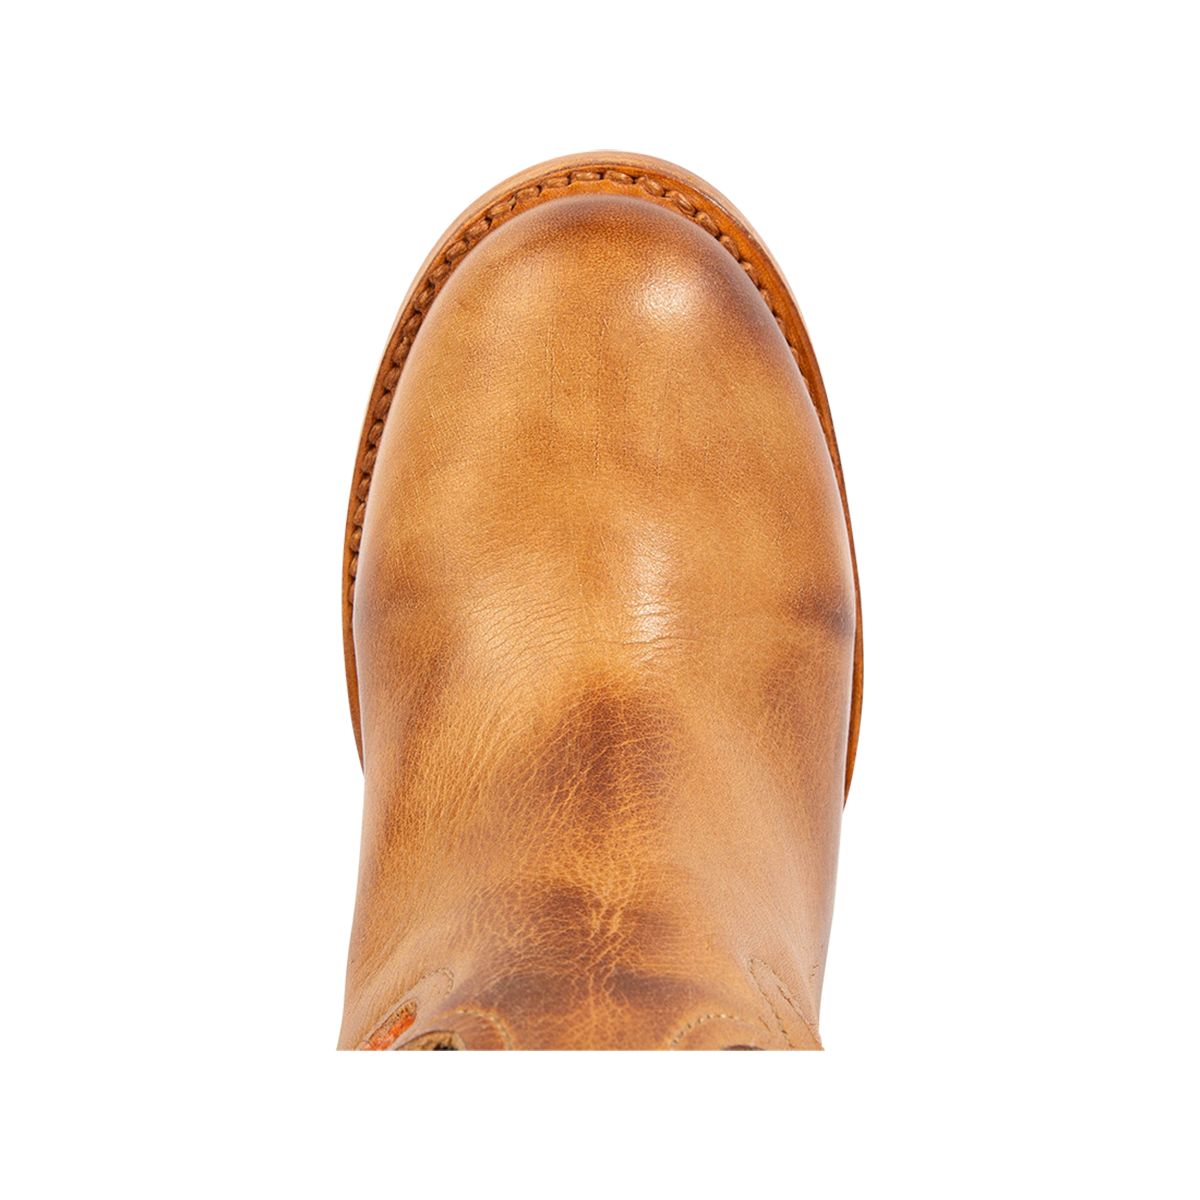 Top view showing a rounded toe and Goodyear welt on FREEBIRD women's Serape tan leather knee high boot